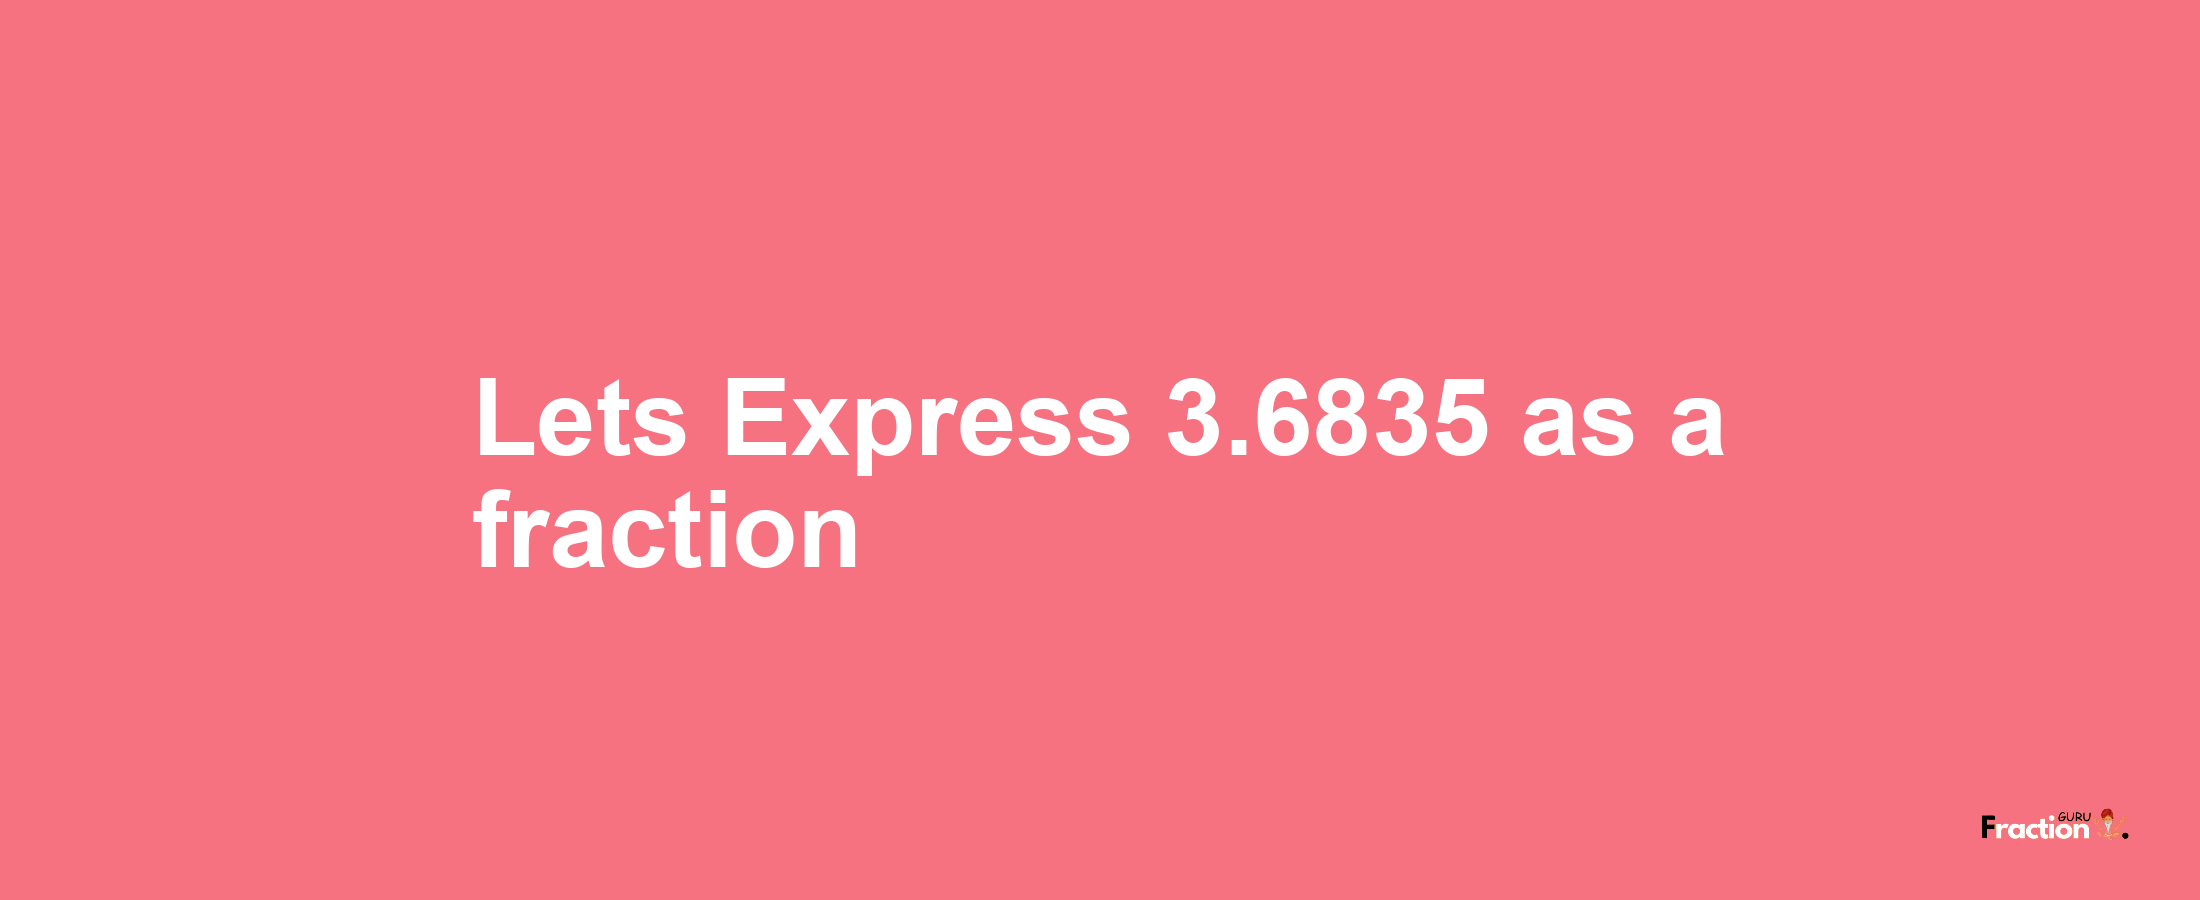 Lets Express 3.6835 as afraction